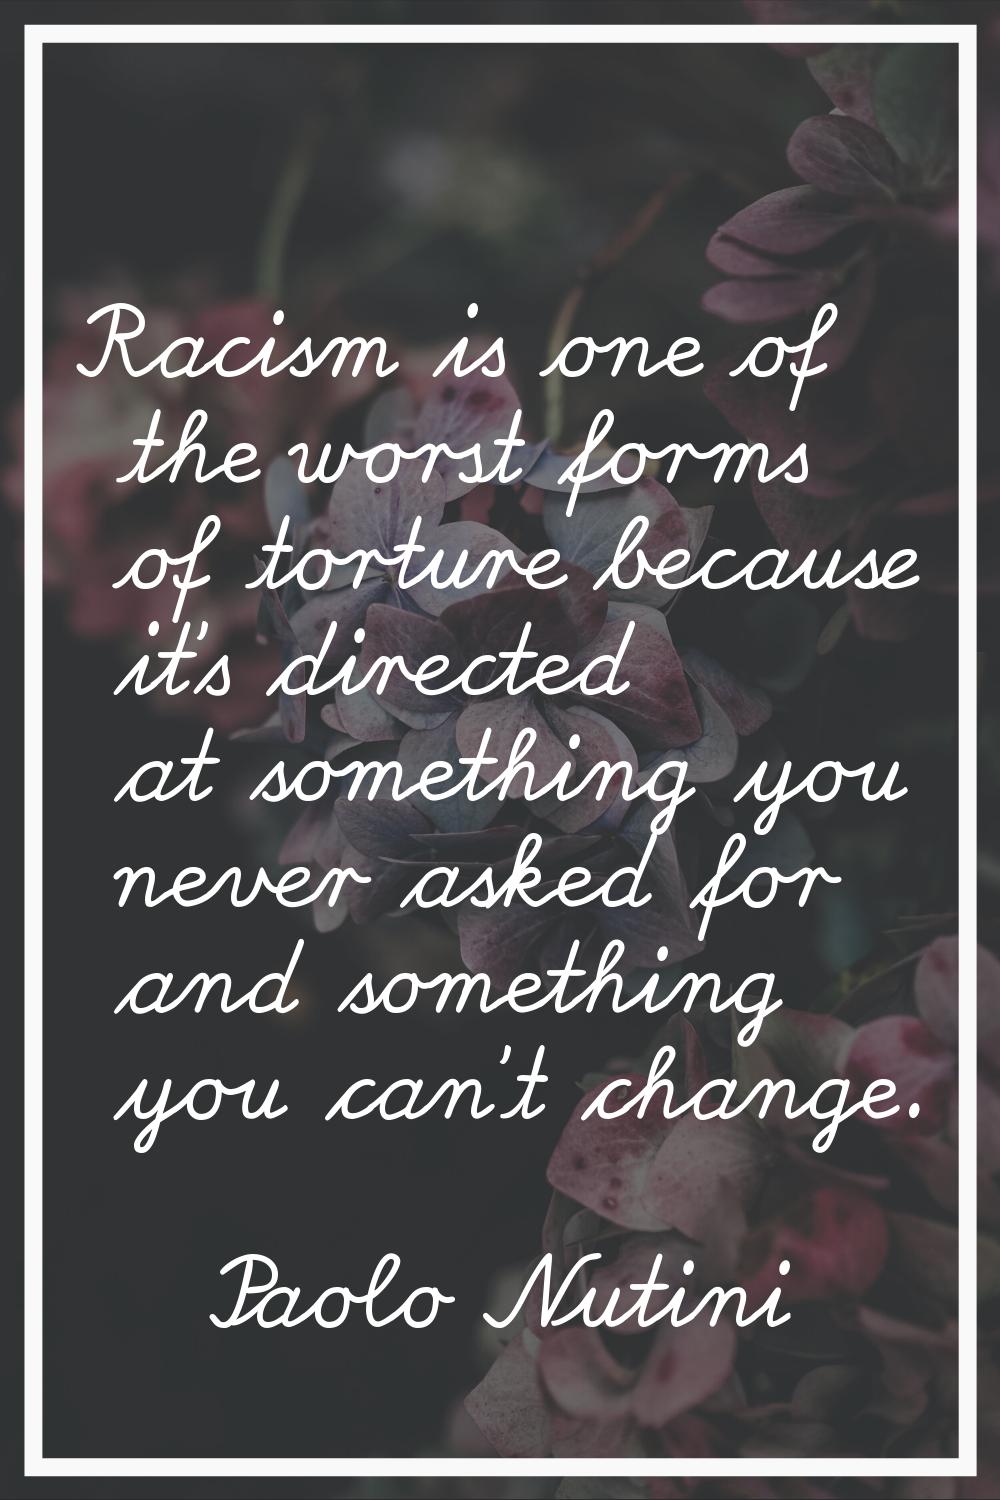 Racism is one of the worst forms of torture because it's directed at something you never asked for 